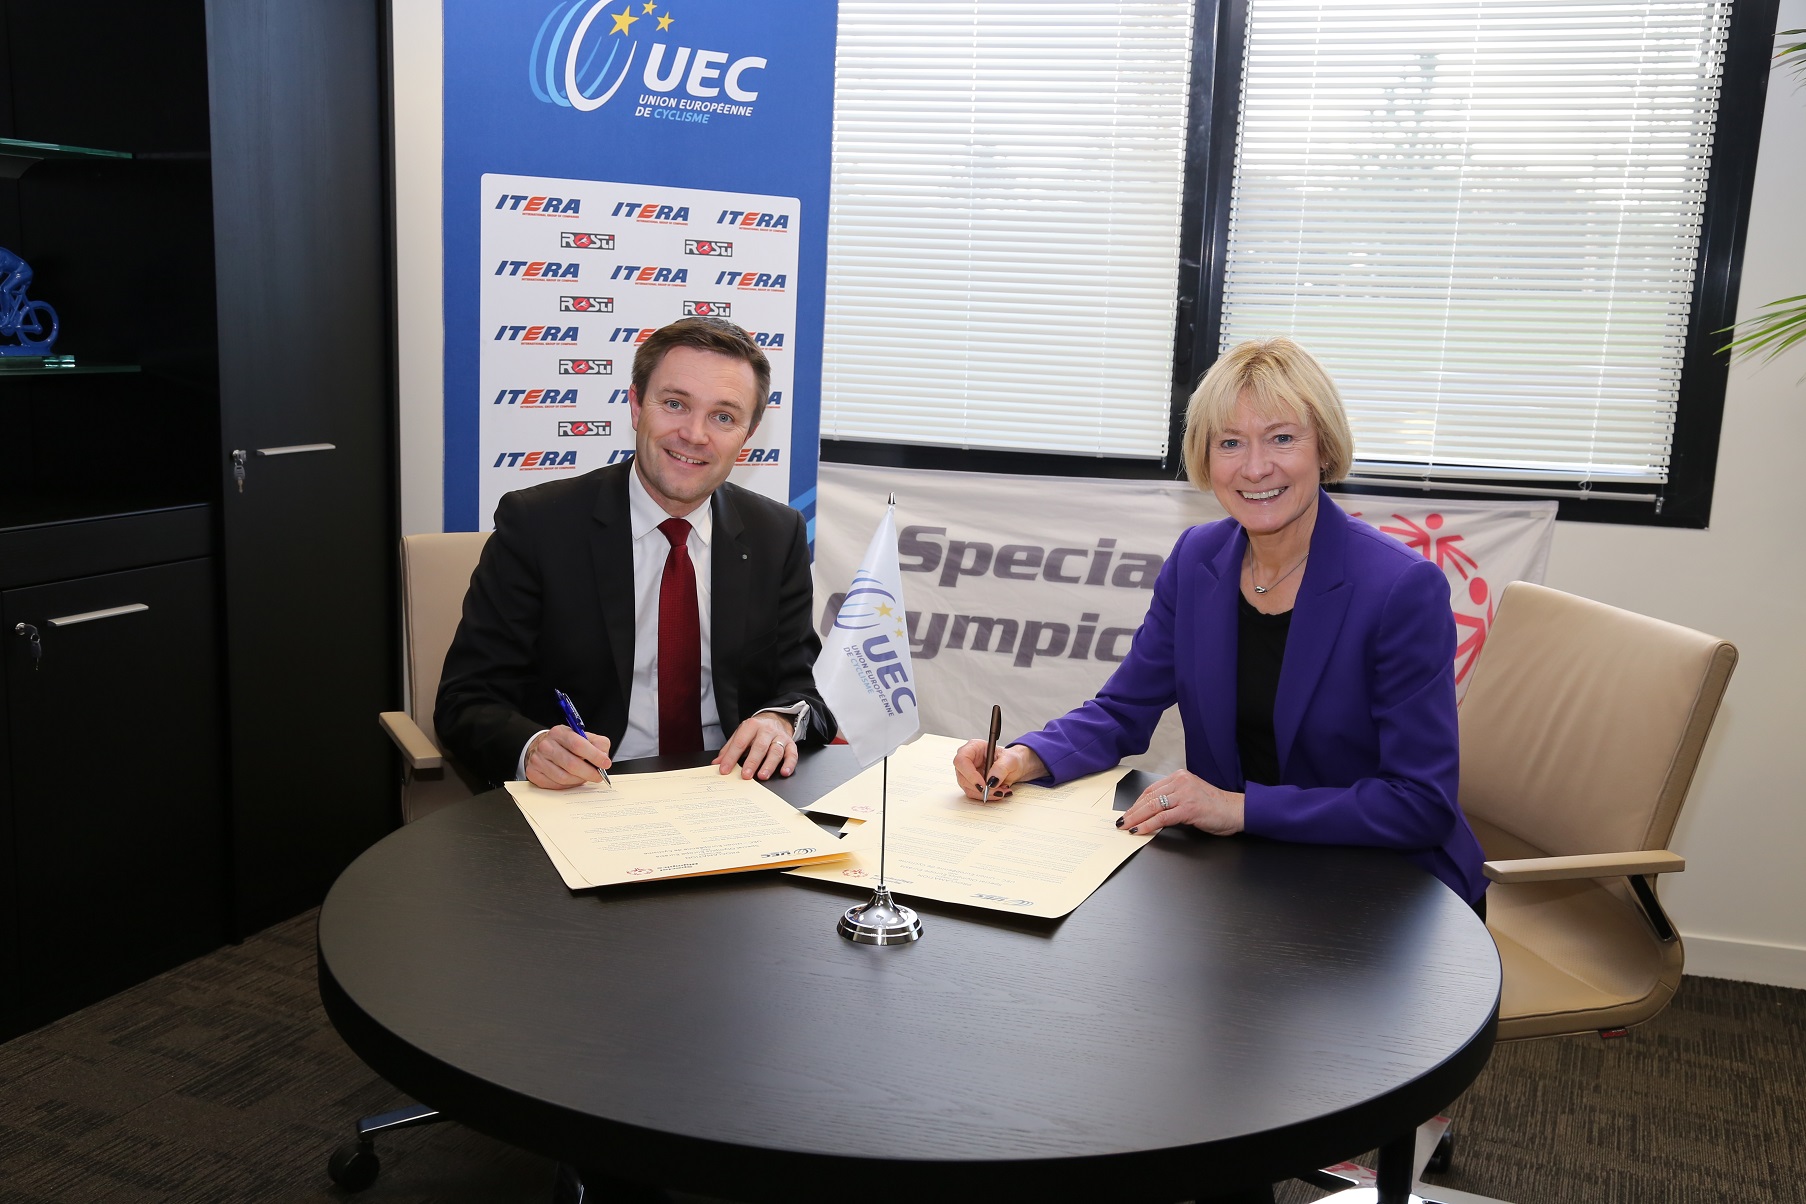 David Lappartient (left), President of the UEC, and Mary Davis (right), regional President of SOEE, at the signing ©UEC